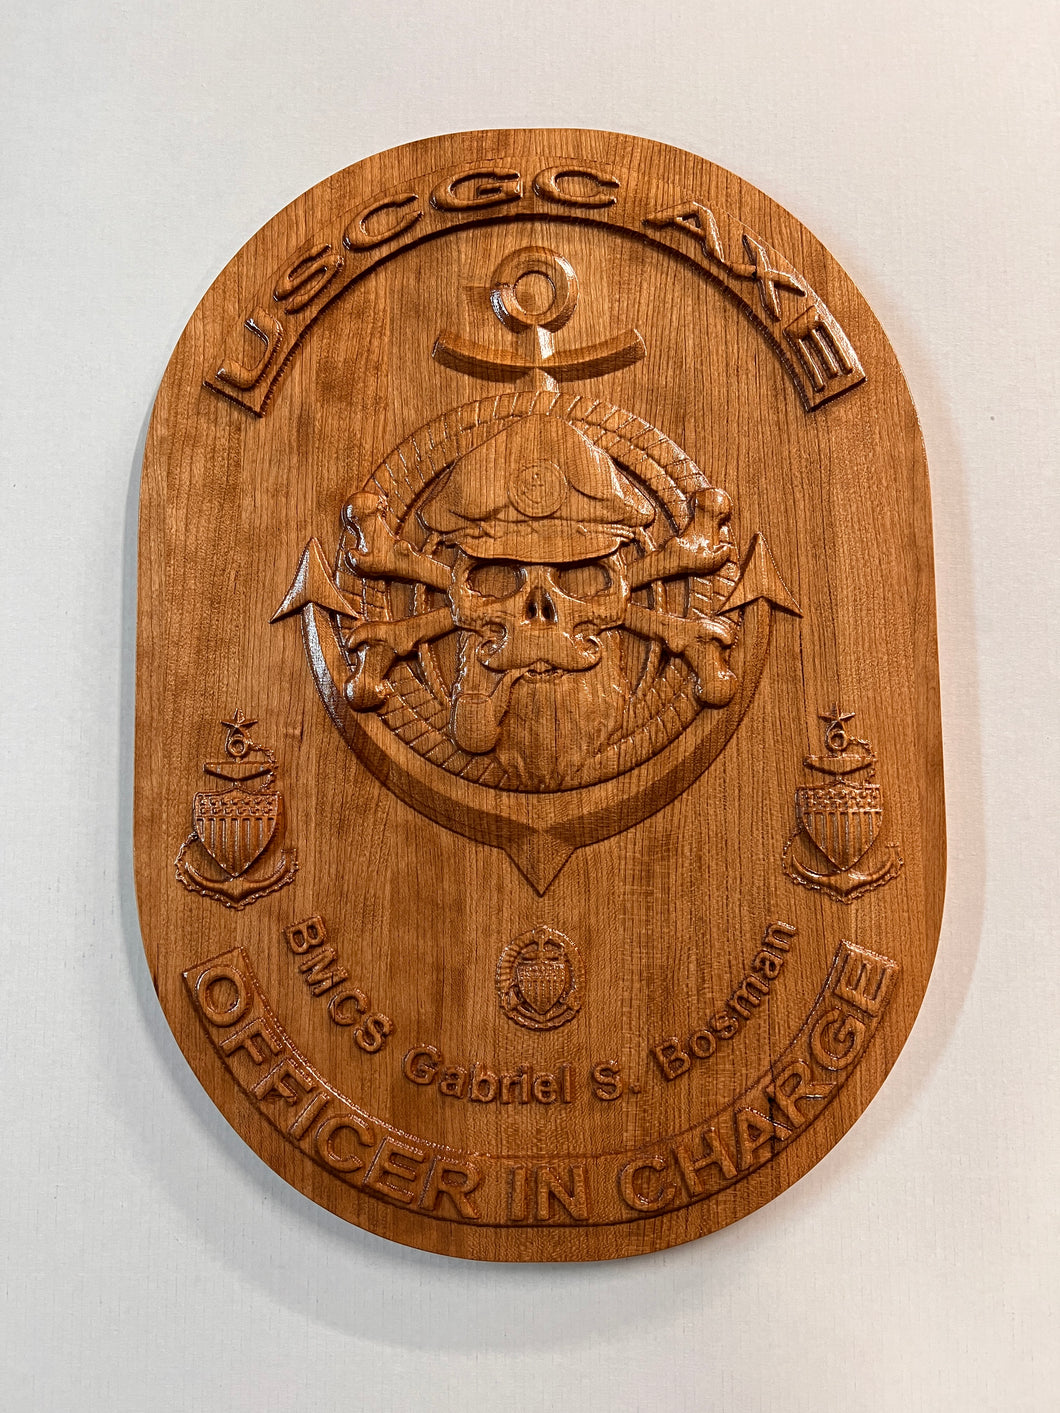 Commanding Officer, Officer in Charge Skull Plaque